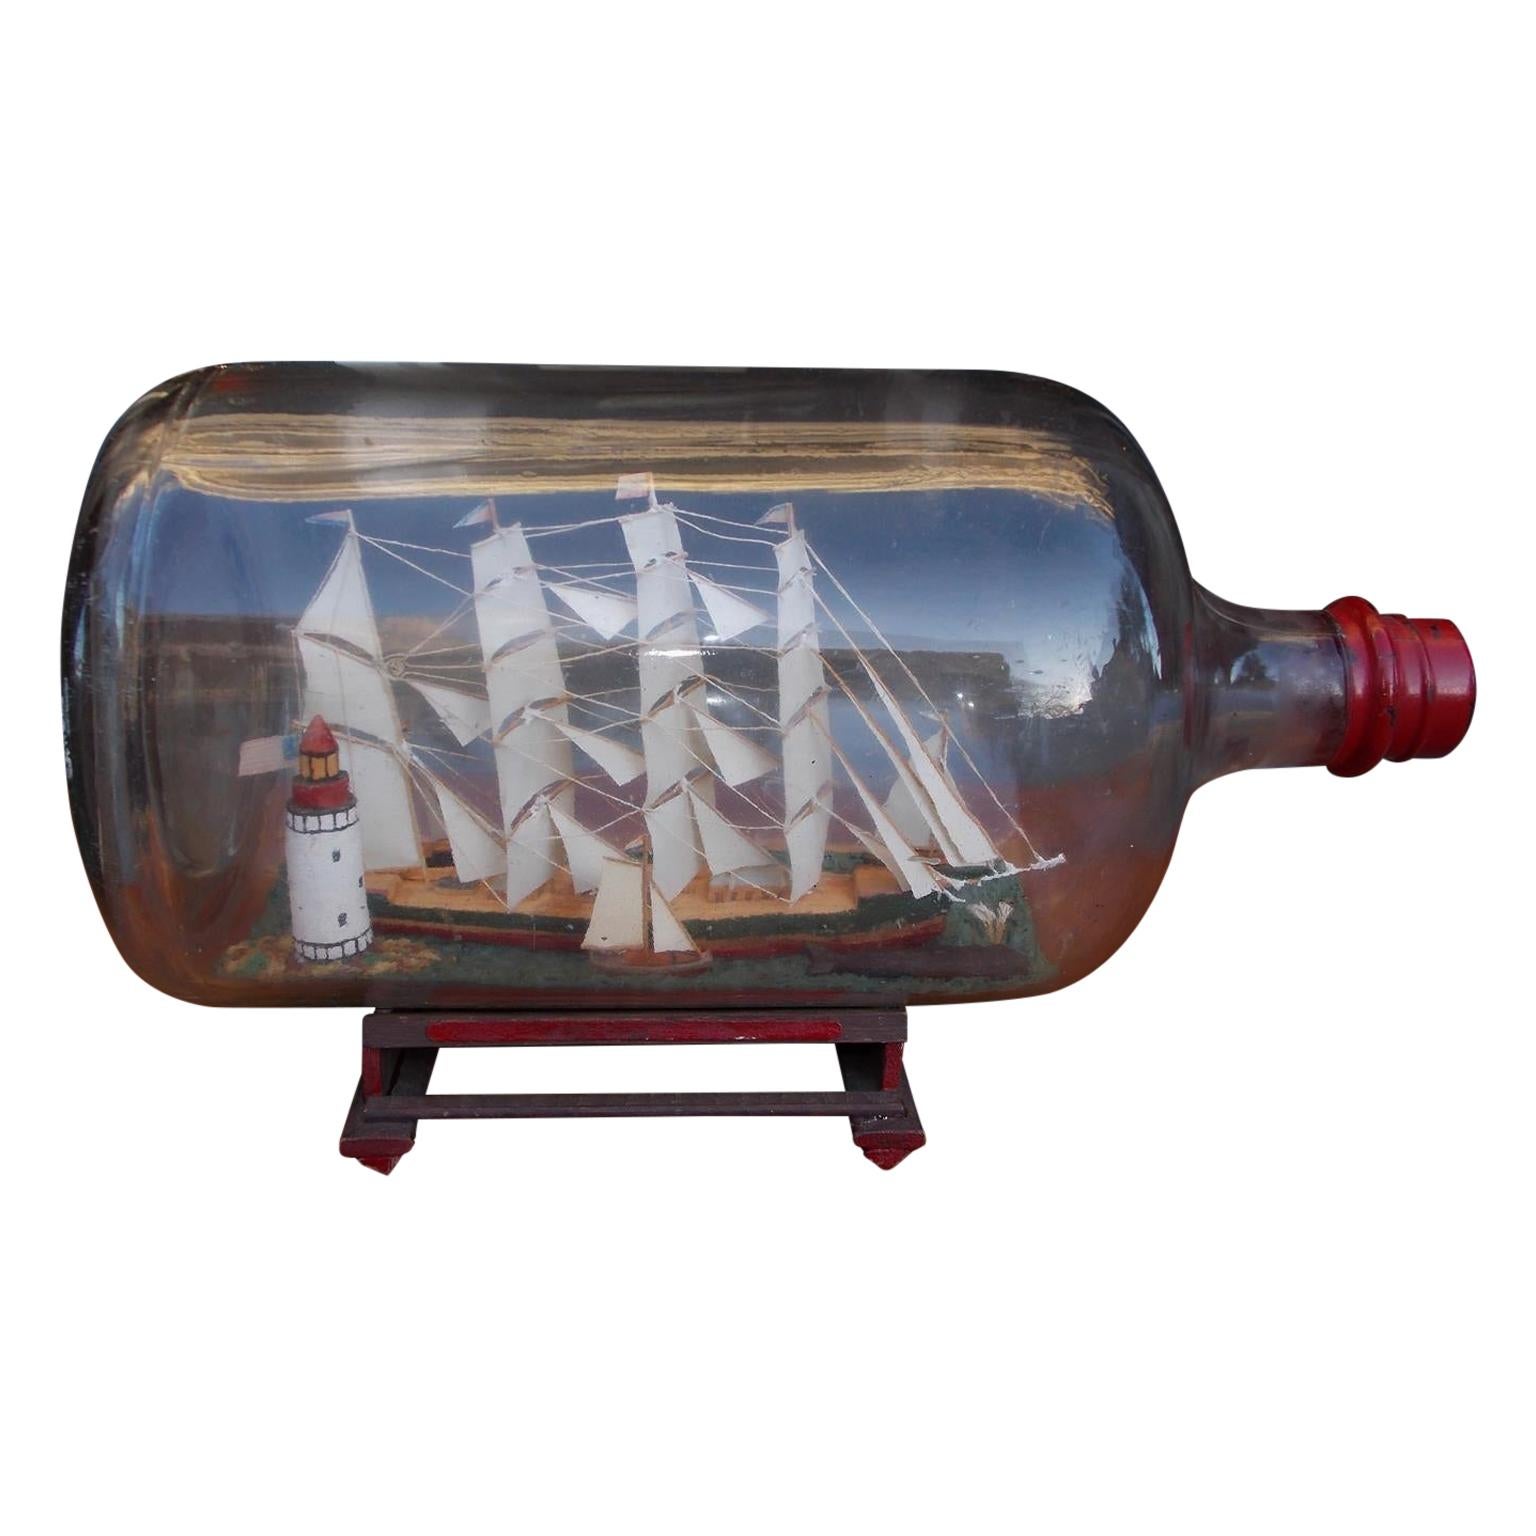 American Four Masted Clipper Ship in Bottle on Original Stand, Circa 1880